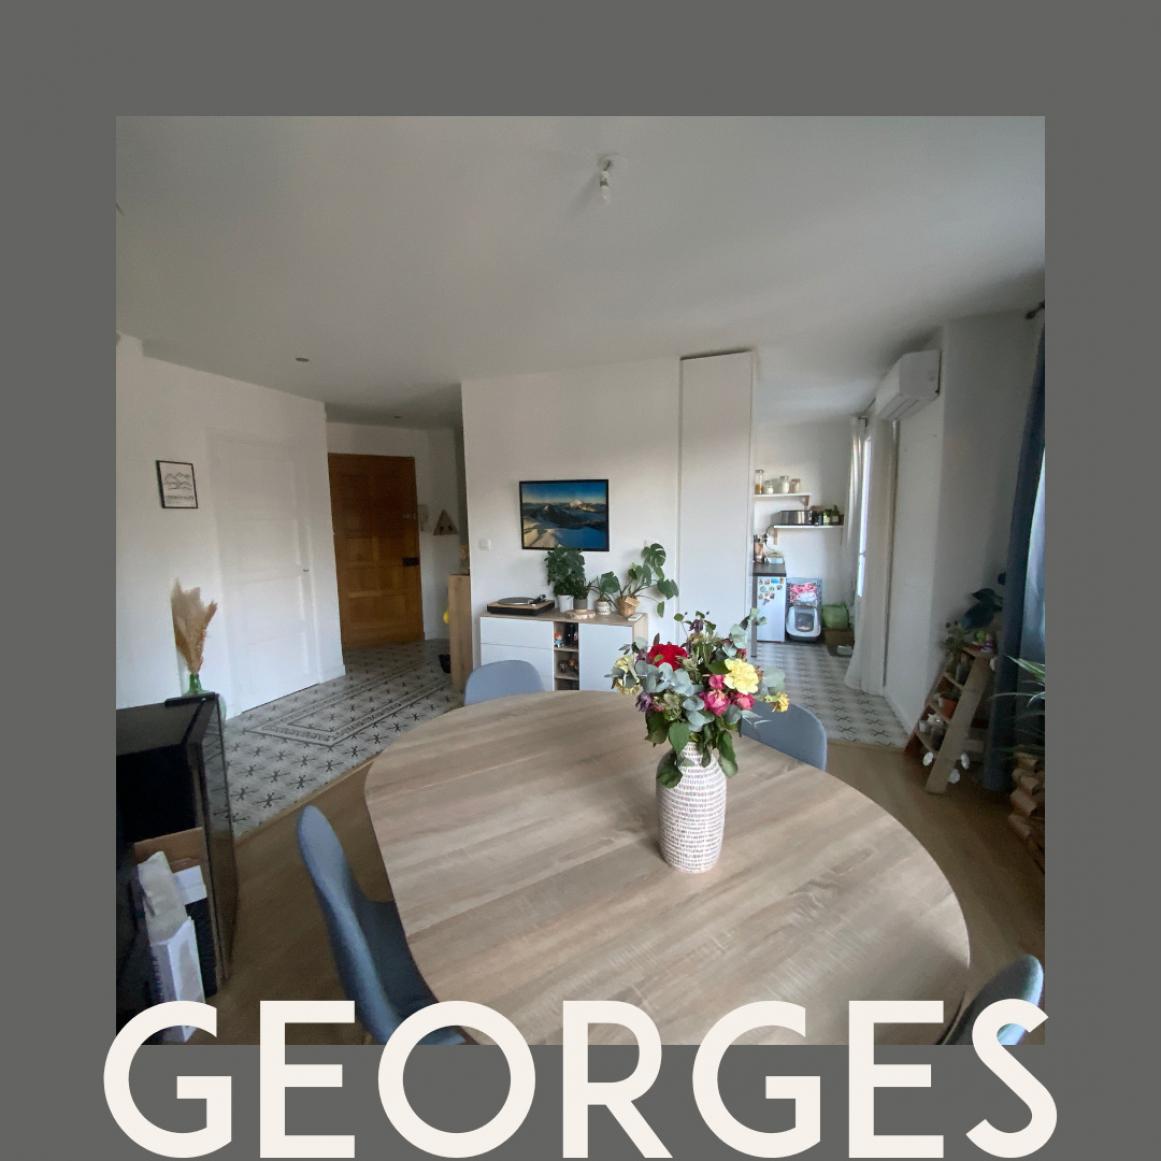 What-Else-GEORGES - Photo 1